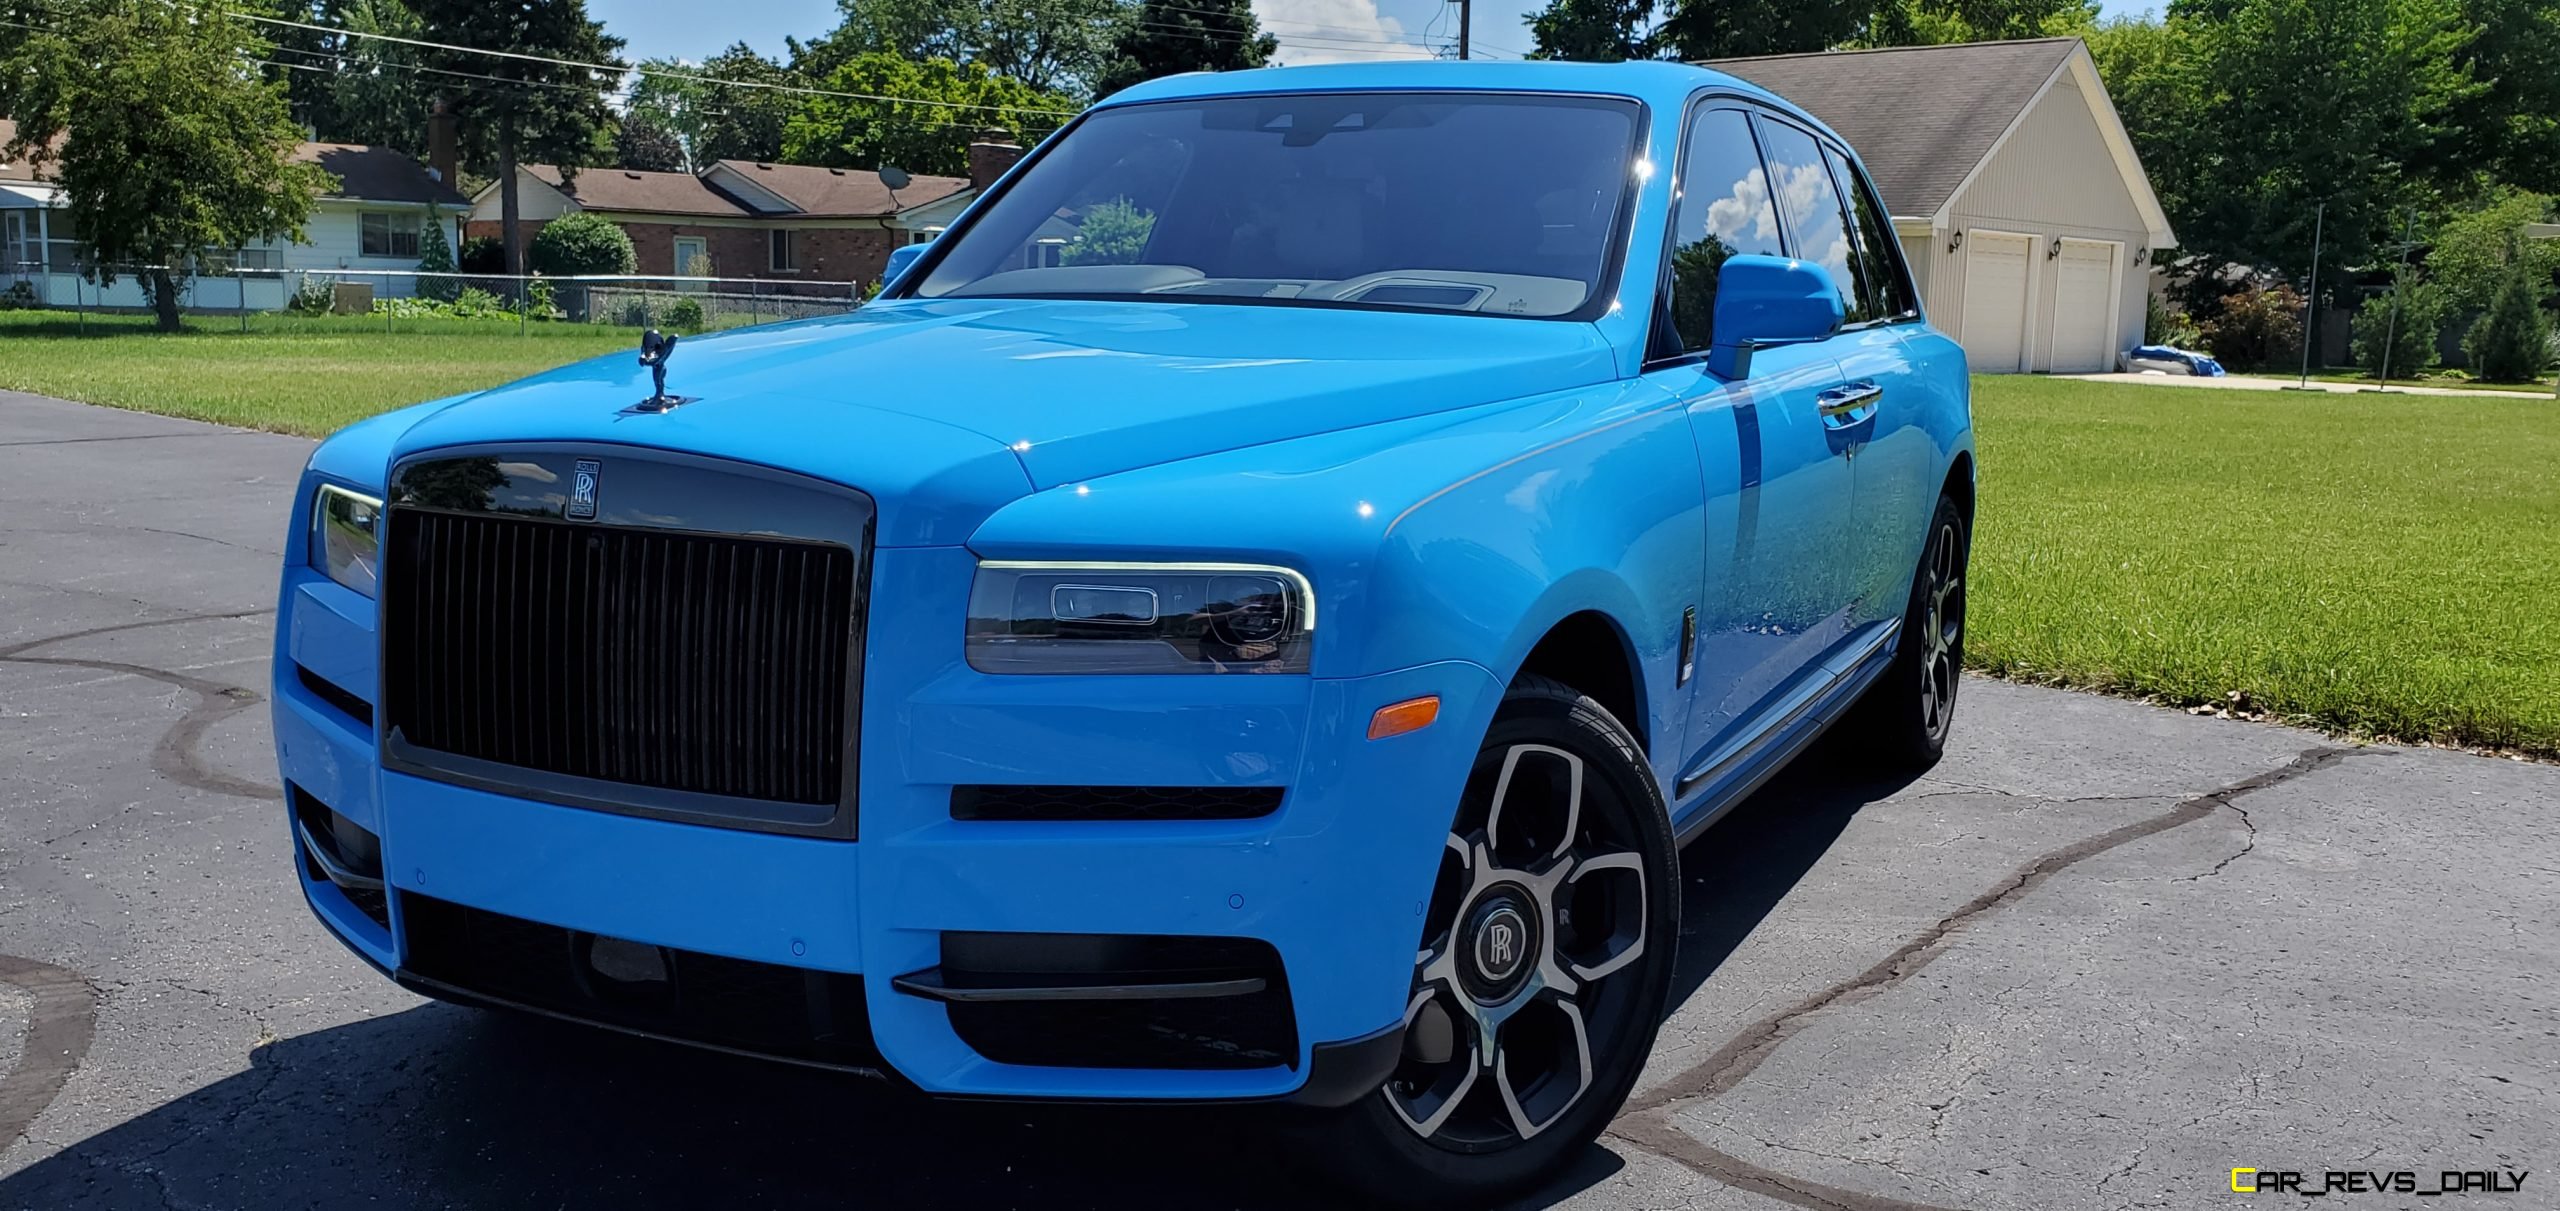 Road Test Review - 2021 Rolls Royce Cullinan Black Badge - Rolls Makes A  Performance SUV And The World Takes Notice » LATEST NEWS »  Car-Revs-Daily.com